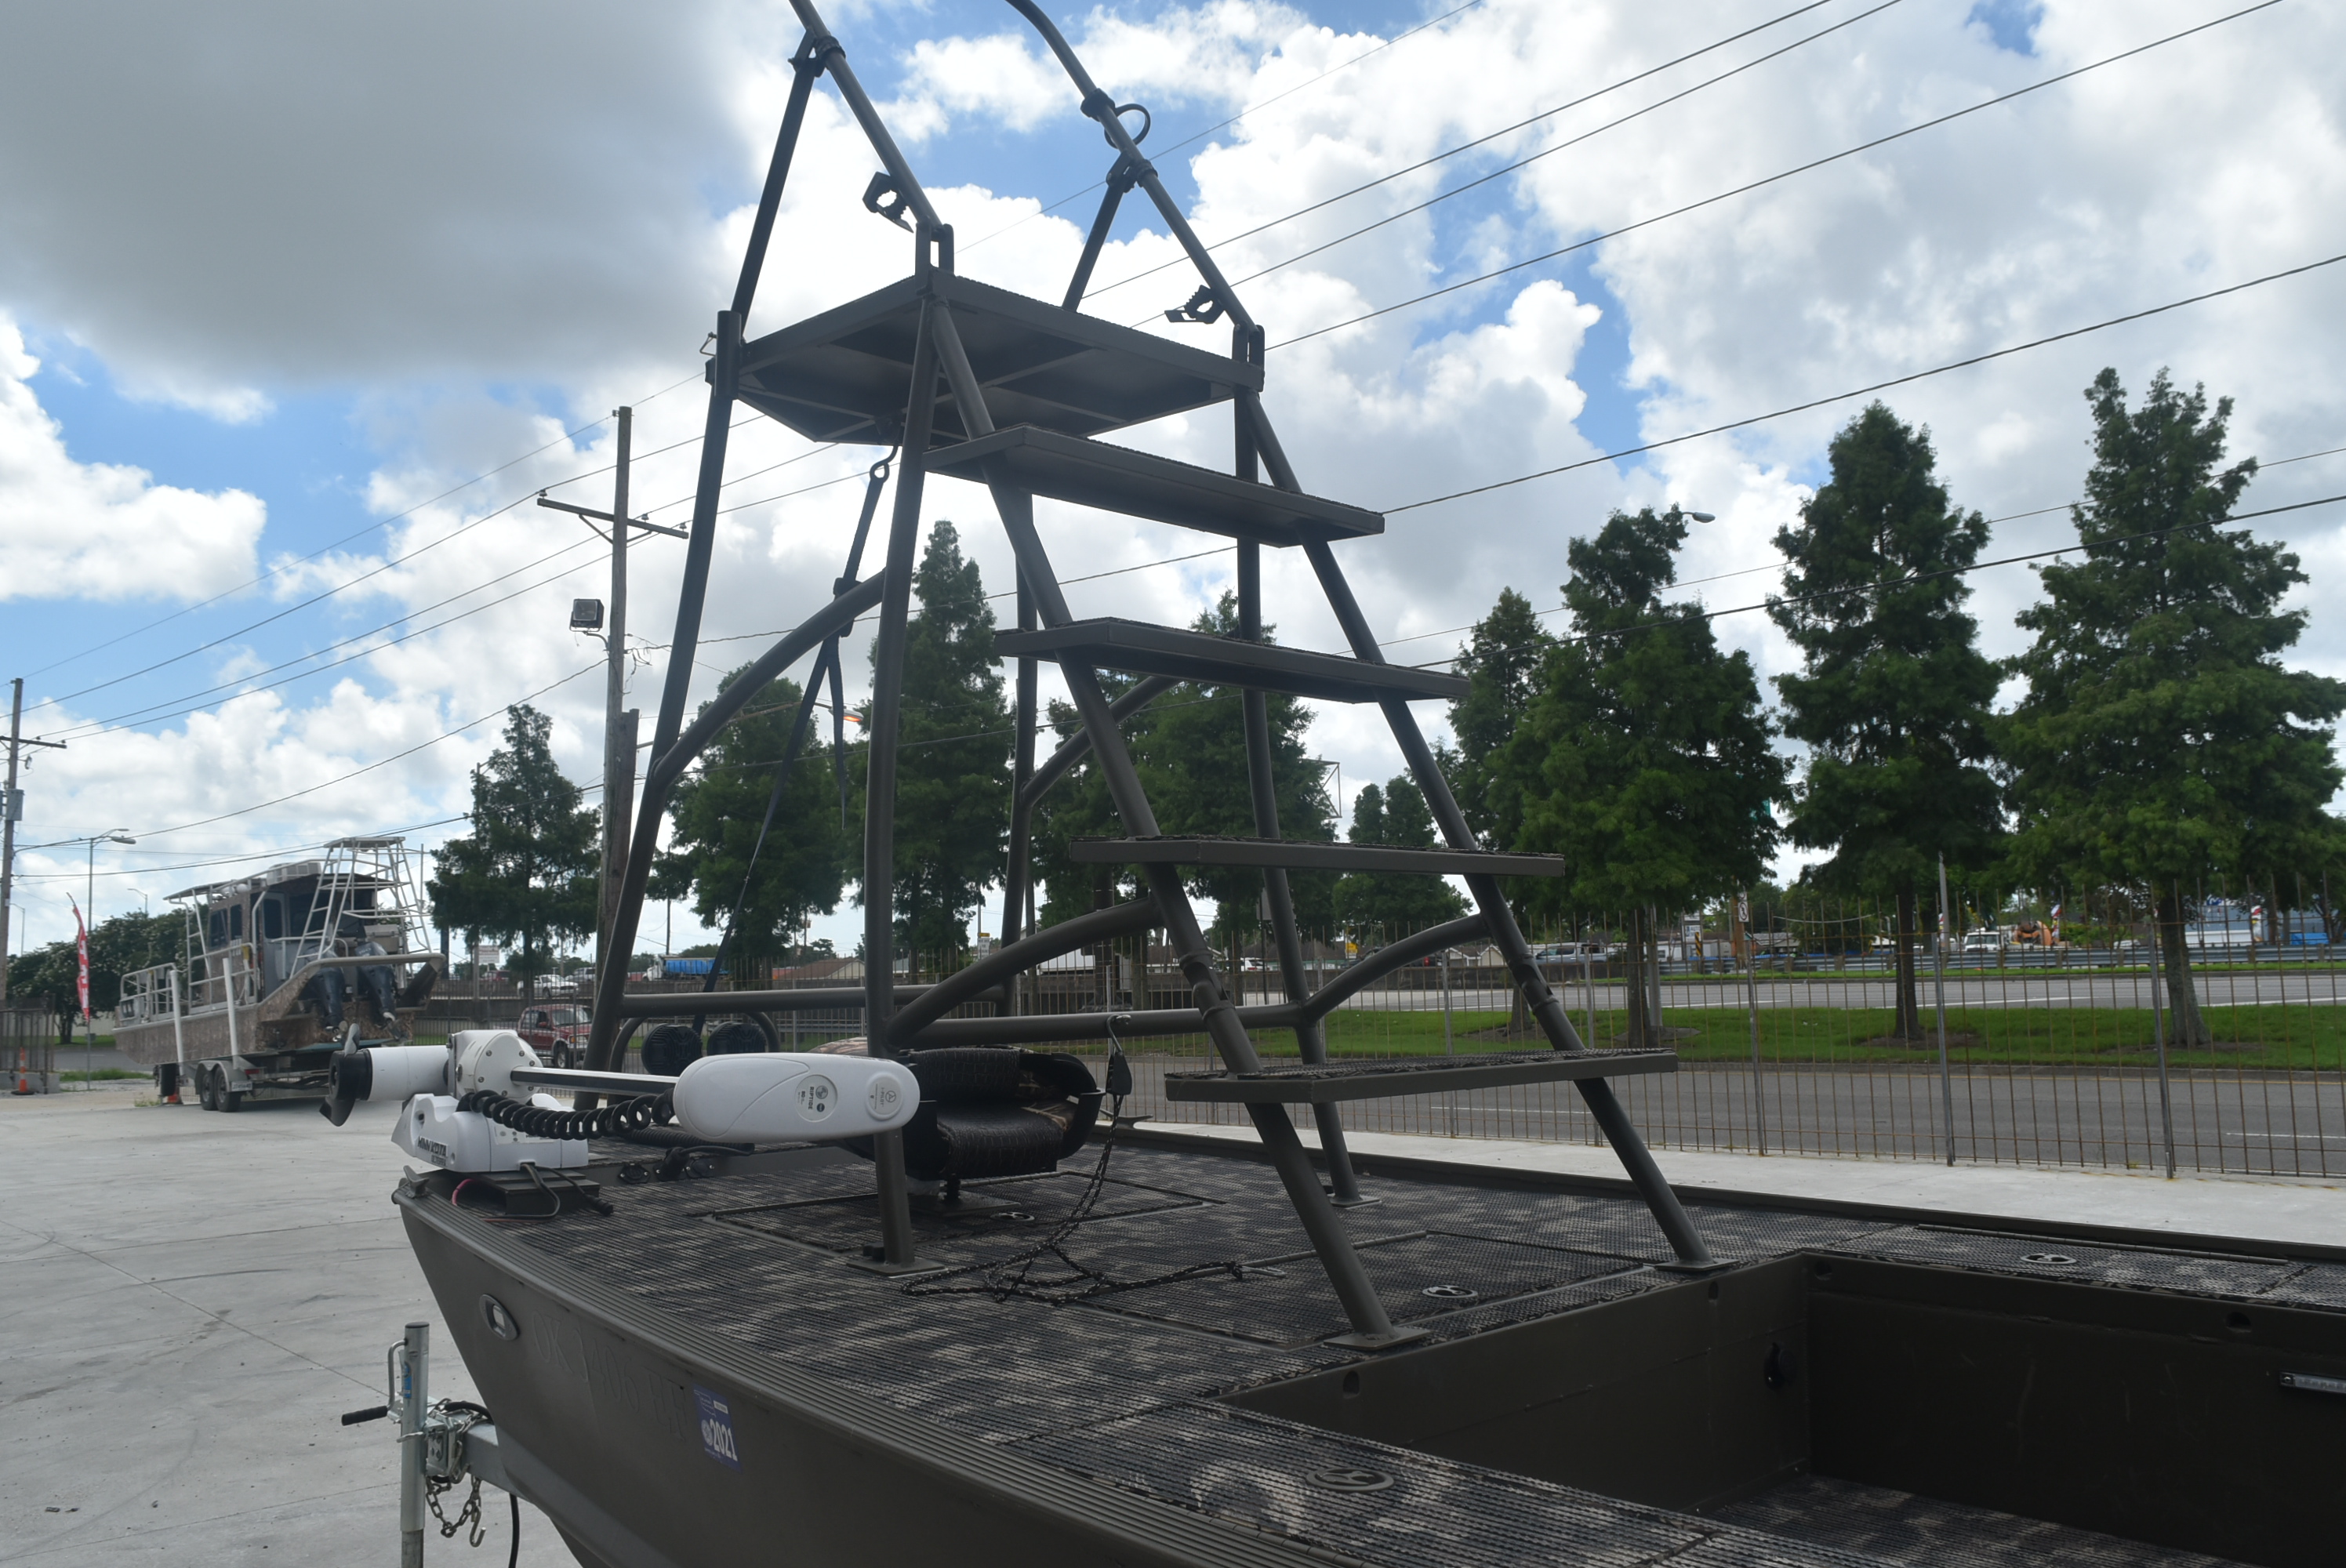 2019 GATORTRAX boat for sale, model of the boat is 1962 & Image # 3 of 9